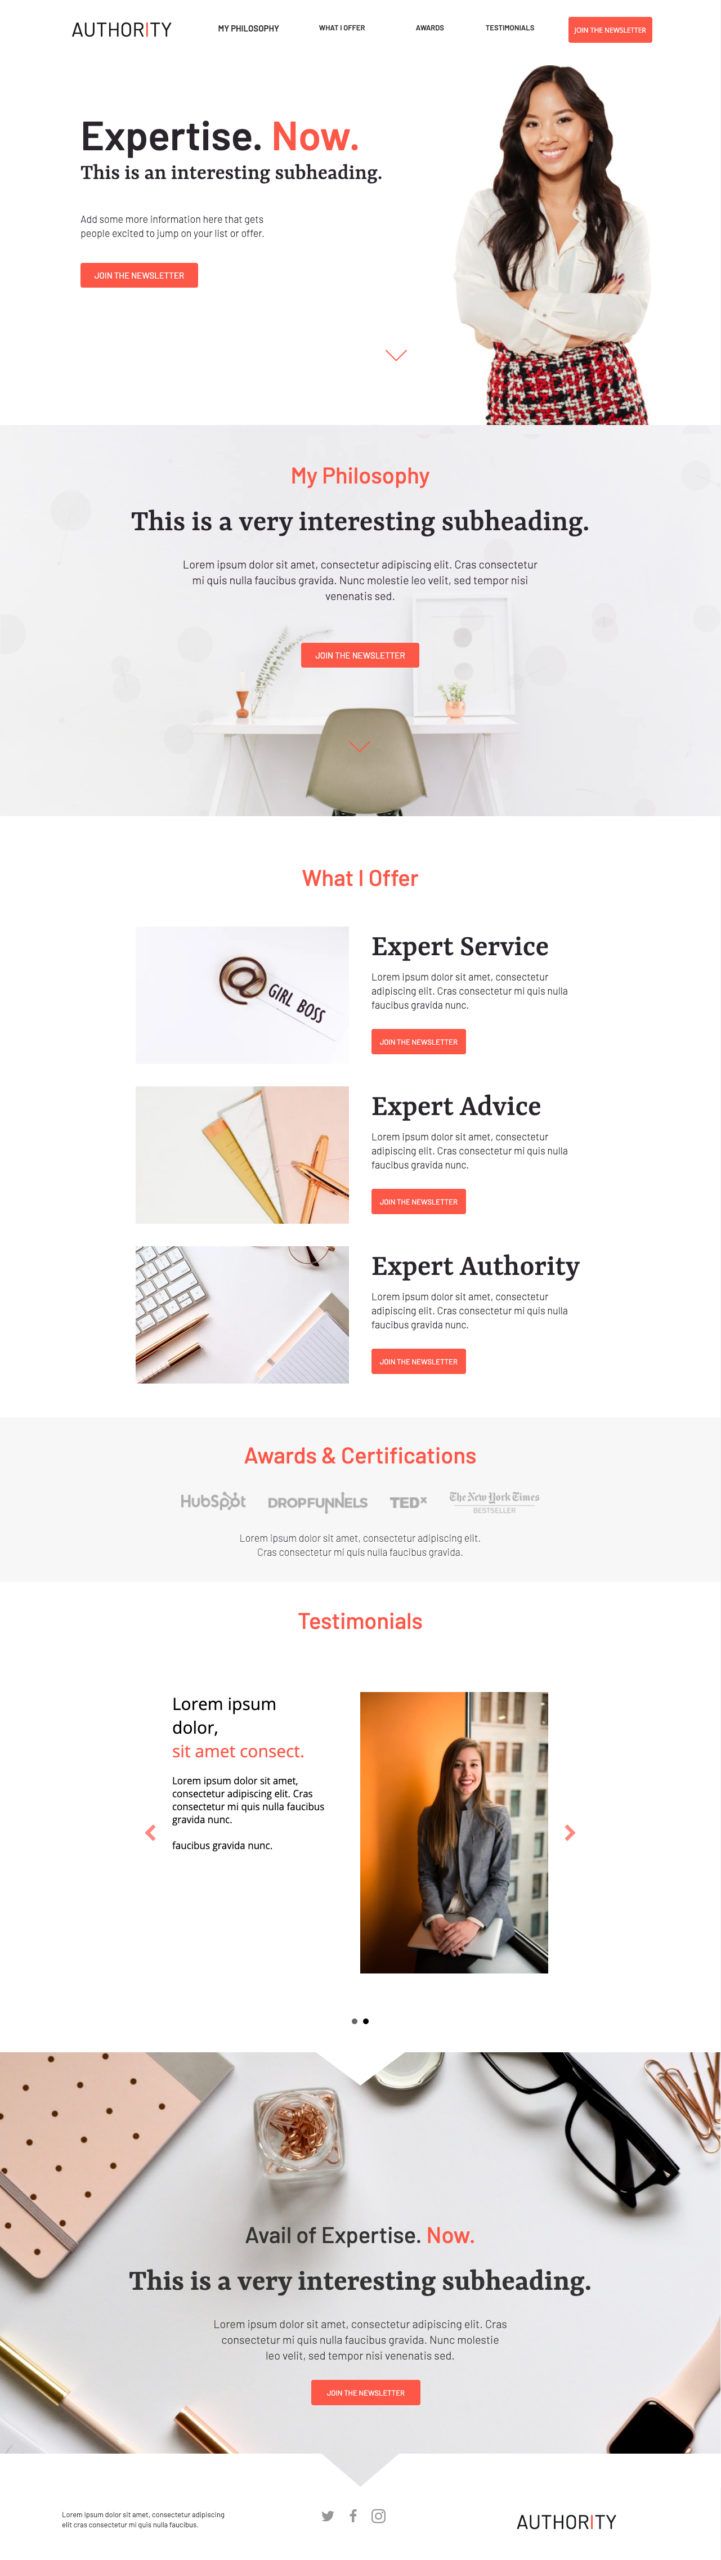 Free DropFunnels Templates - Authority Home Full